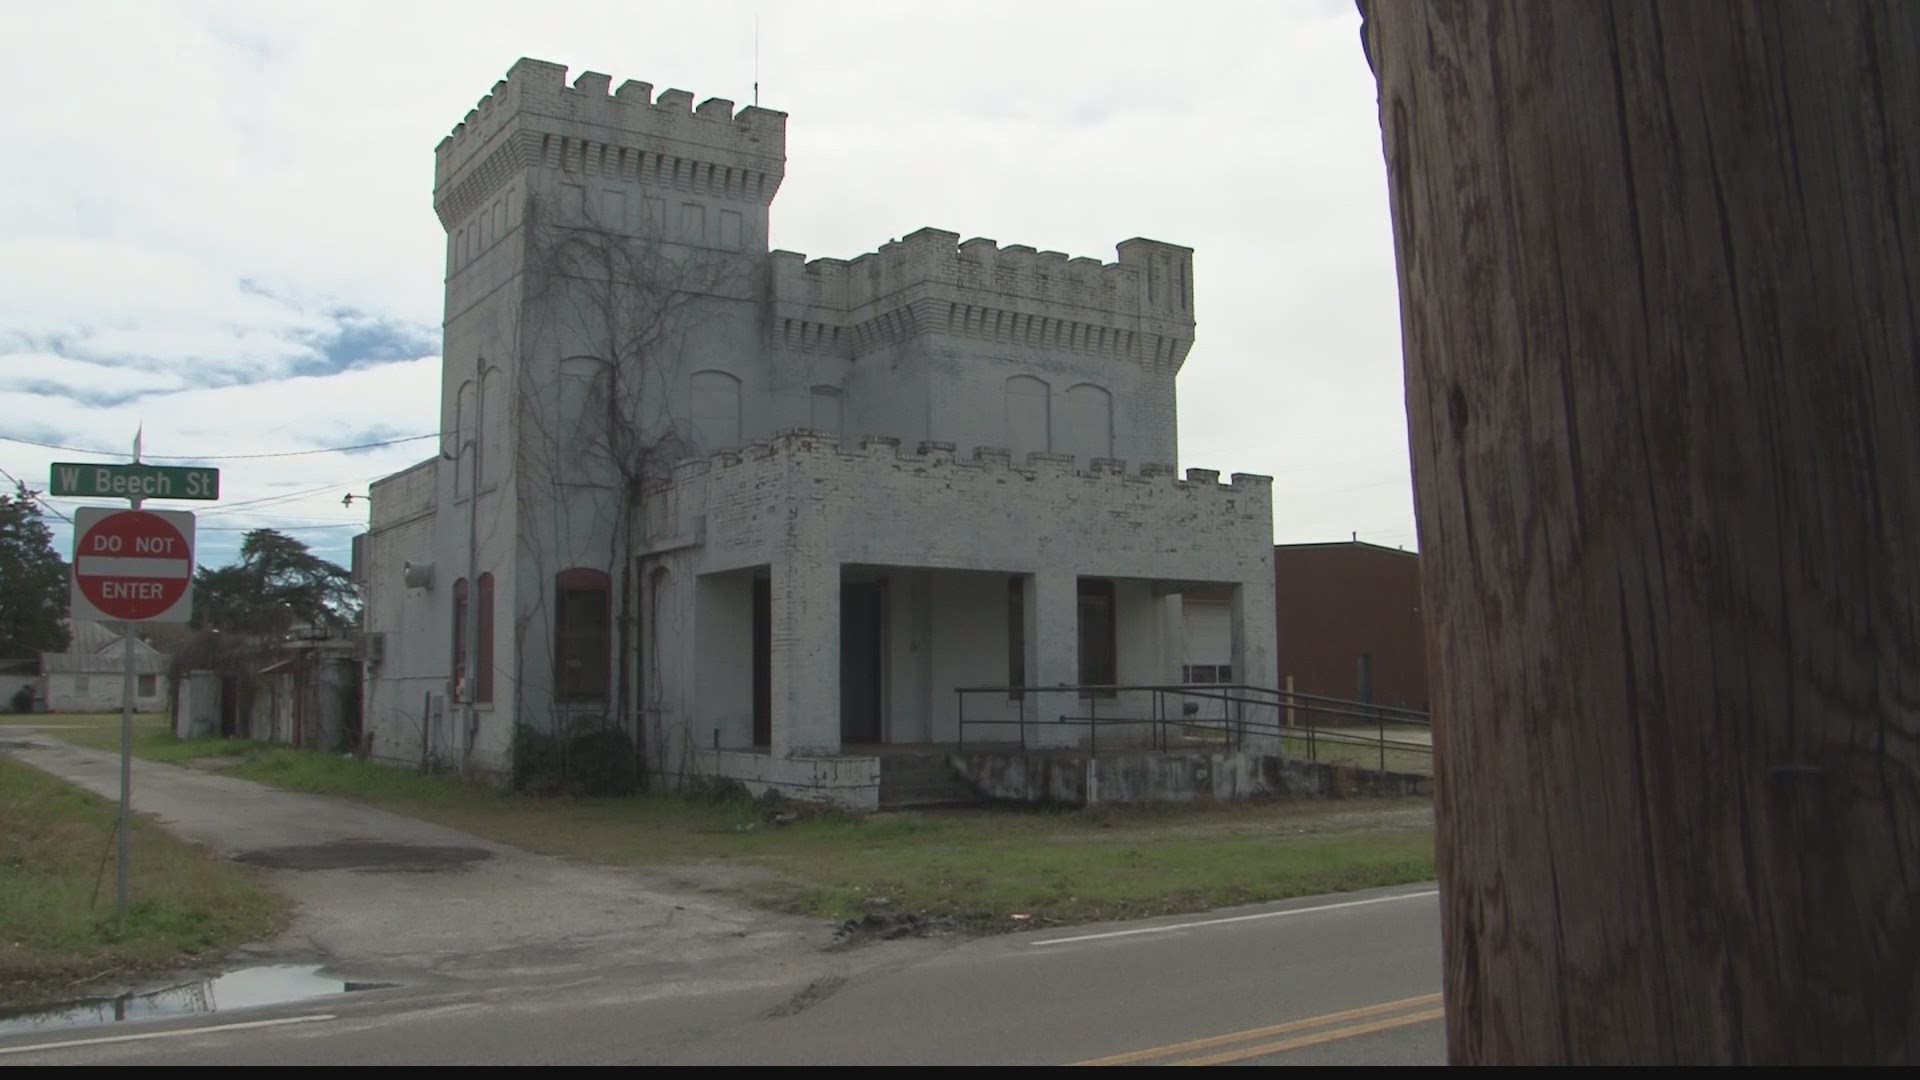 You can own the old jail in Cochran, and some people already have creative ideas about what it could become